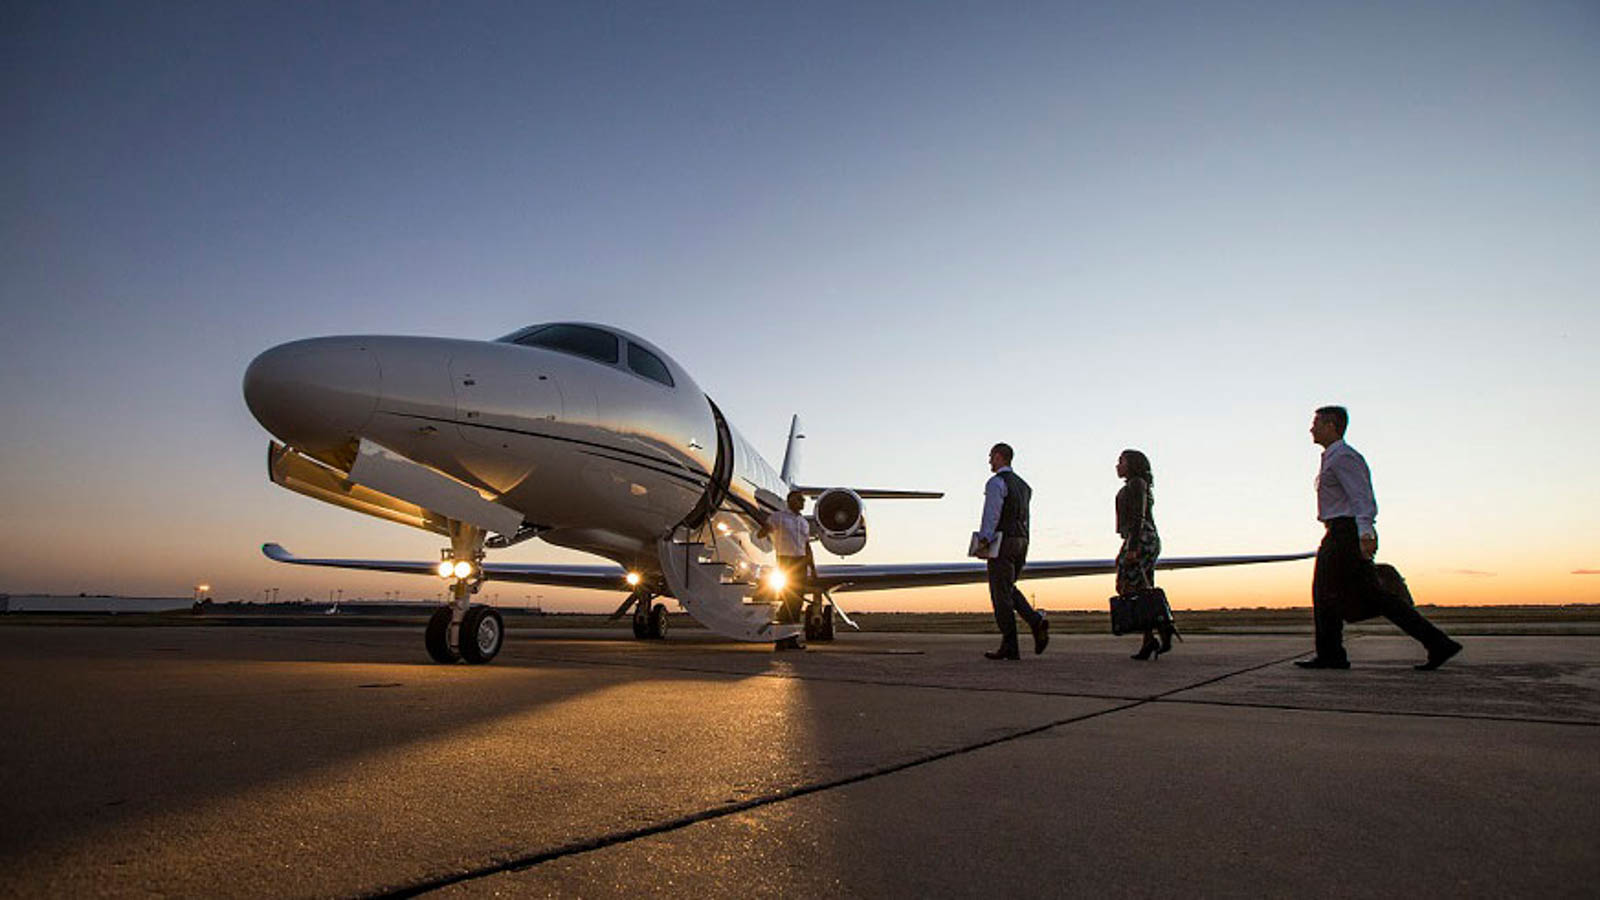 Cheap Private Jet Charter - 2022 Guide & Best Prices Wijet